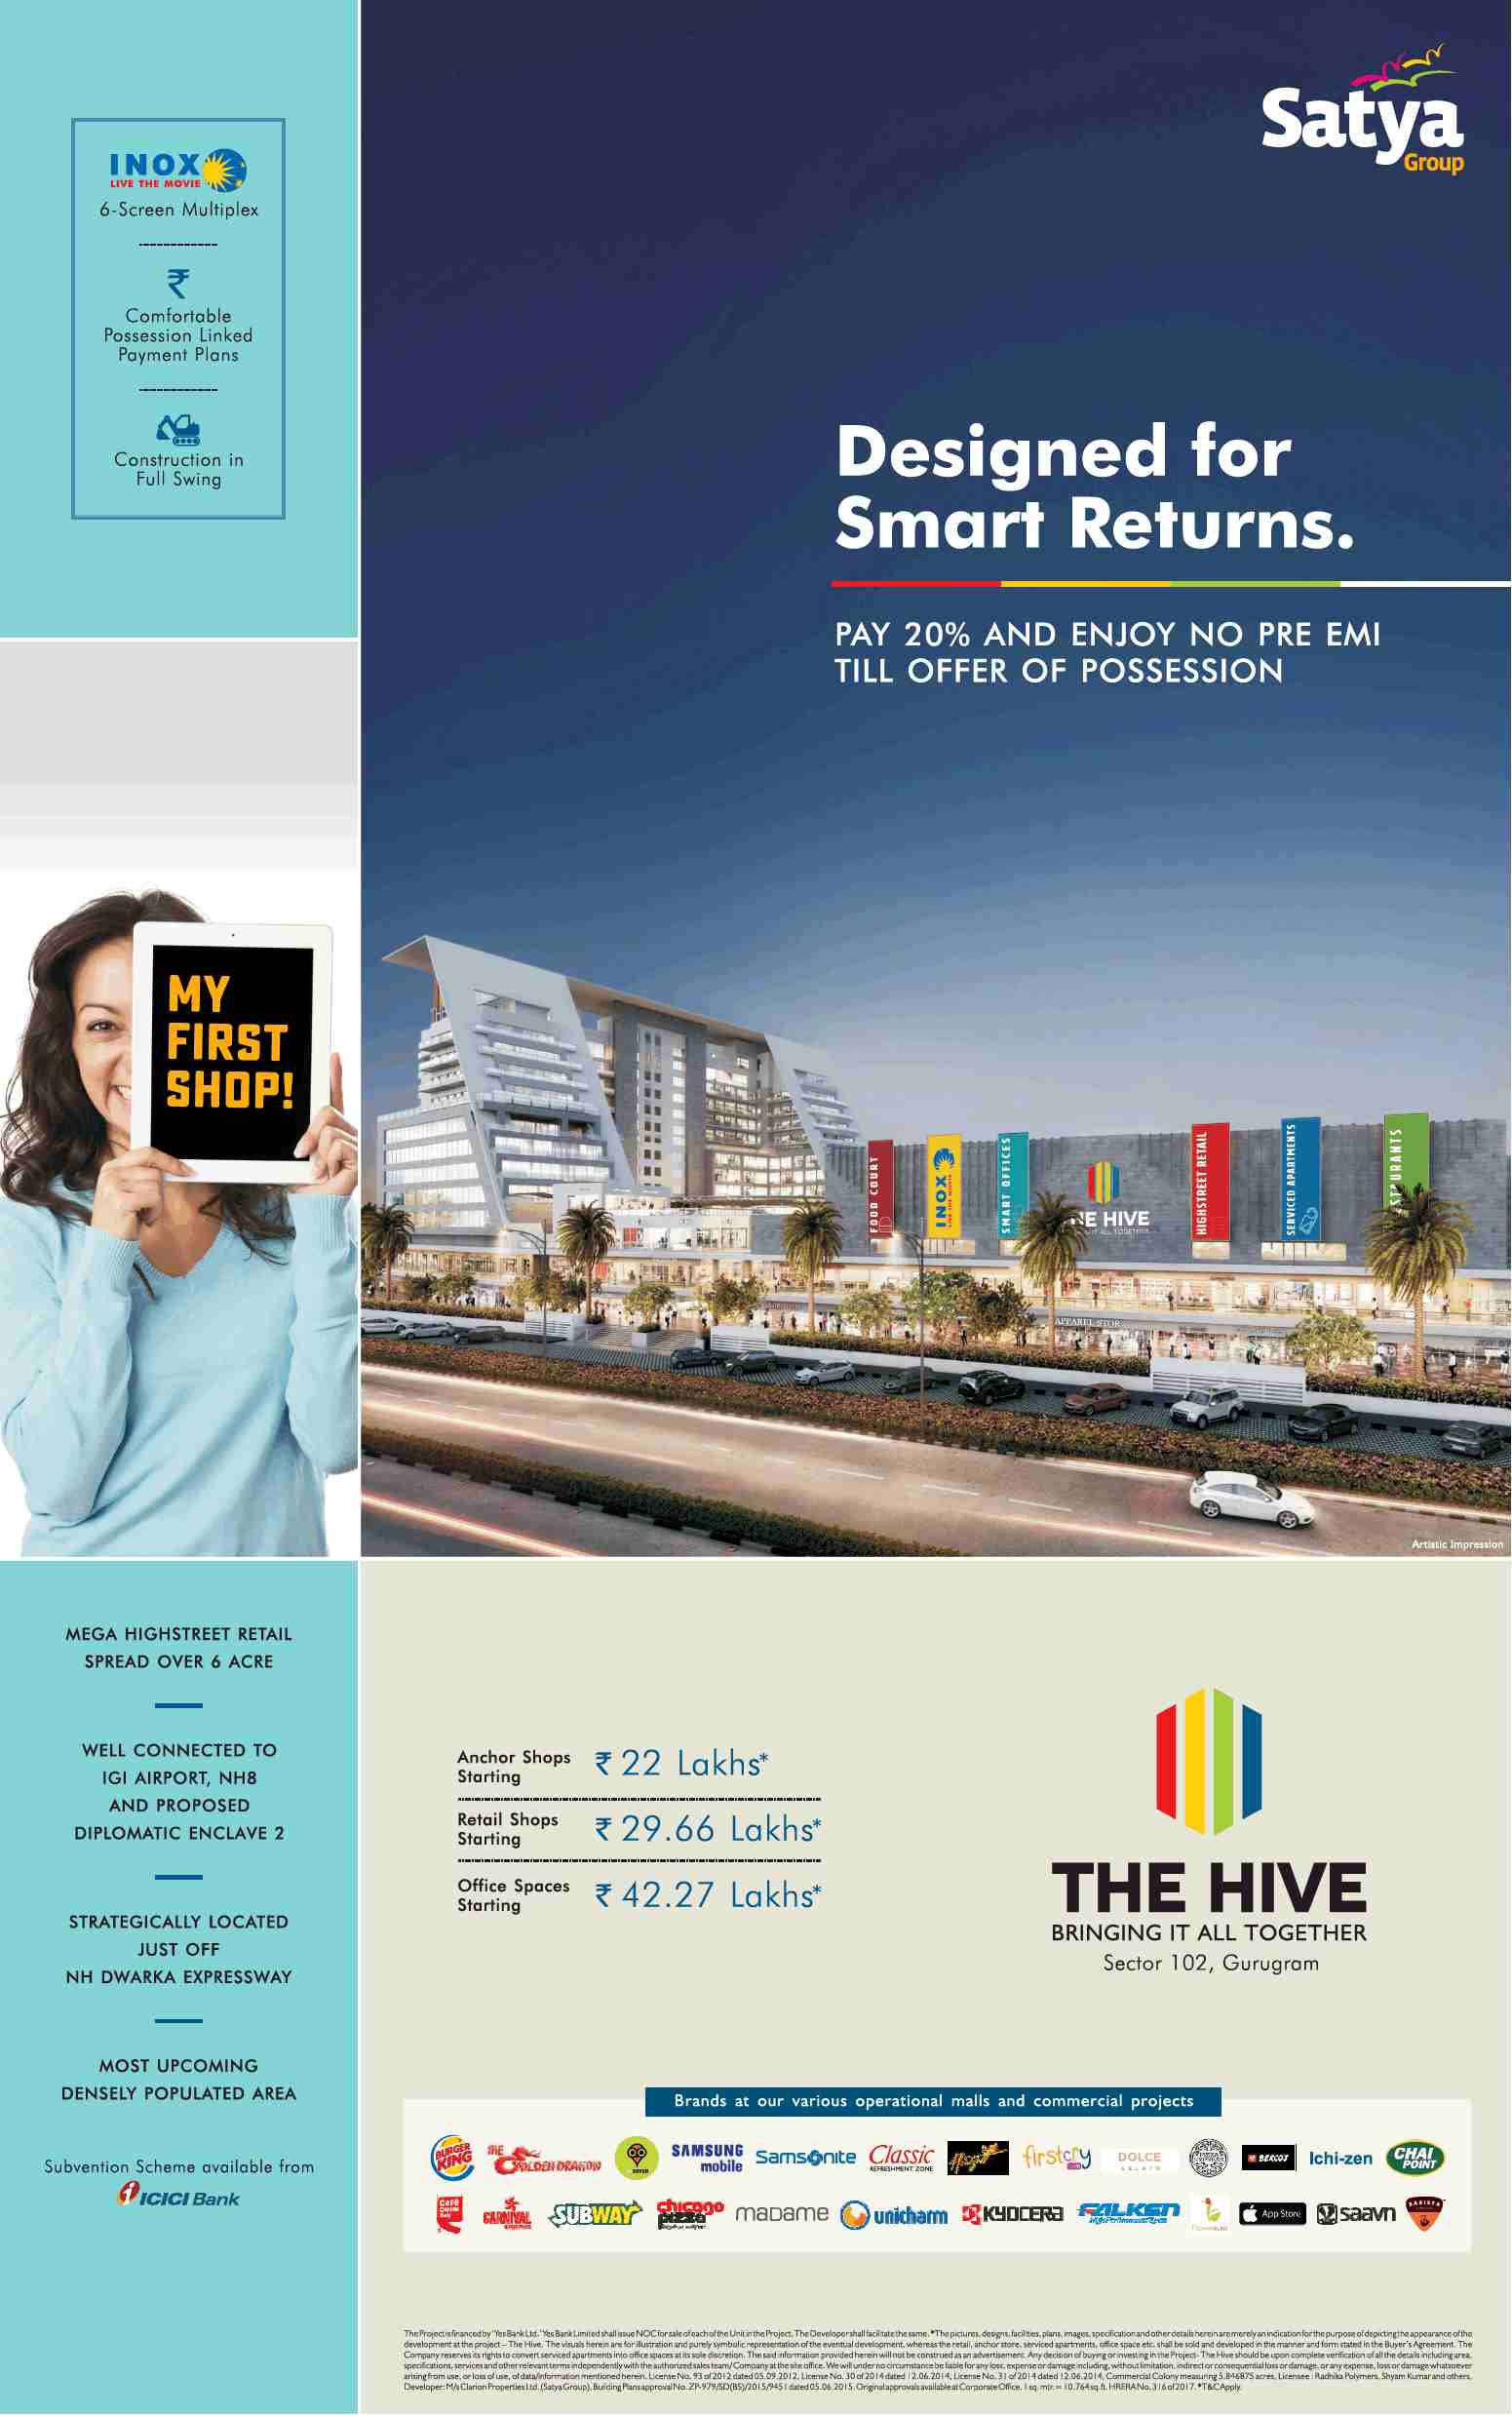 Pay 20% and enjoy no pre-EMI till offer of possession at Satya The Hive in Gurgaon Update